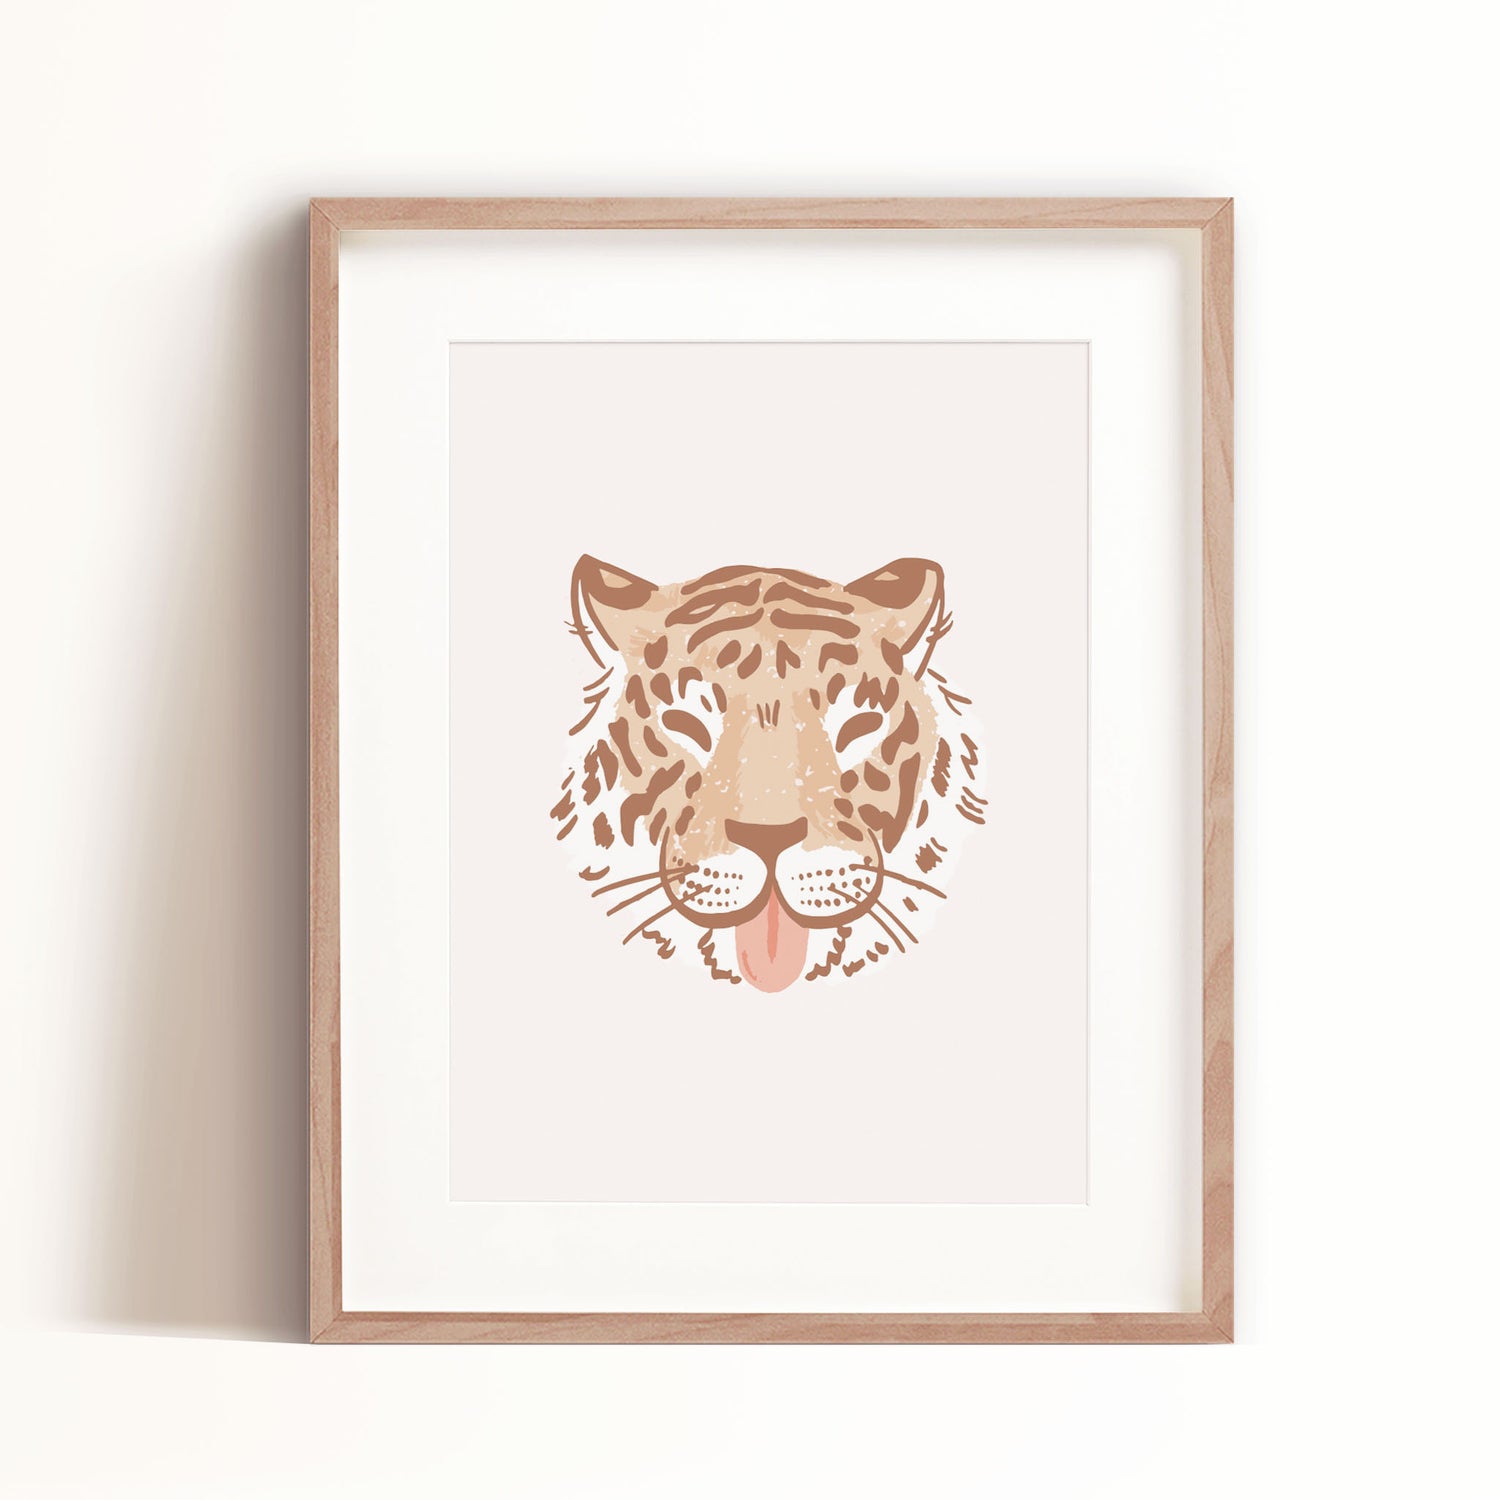 Tiger Head art print in tan is great for kids spaces